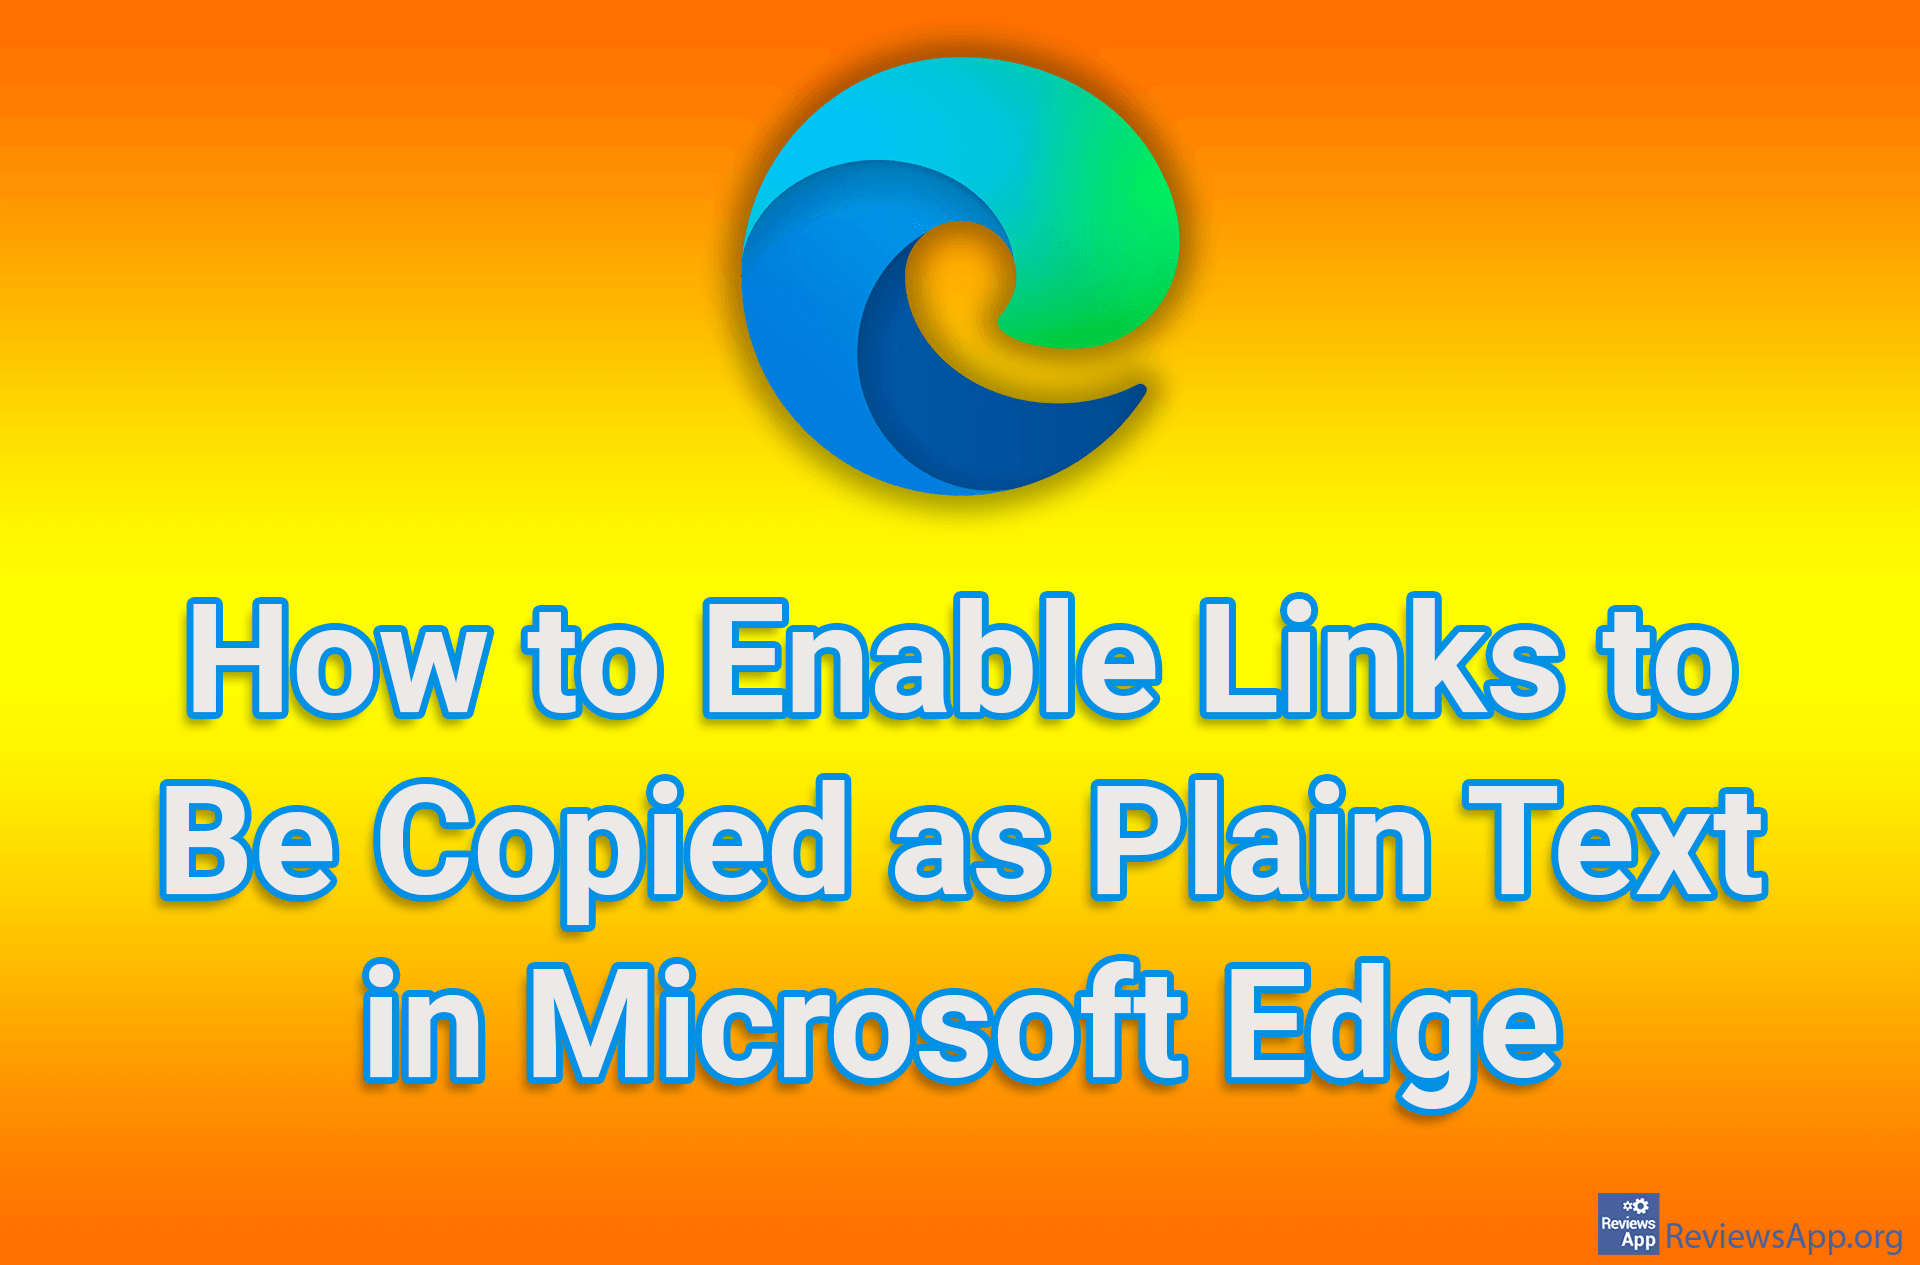 How to Enable Links to Be Copied as Plain Text in Microsoft Edge